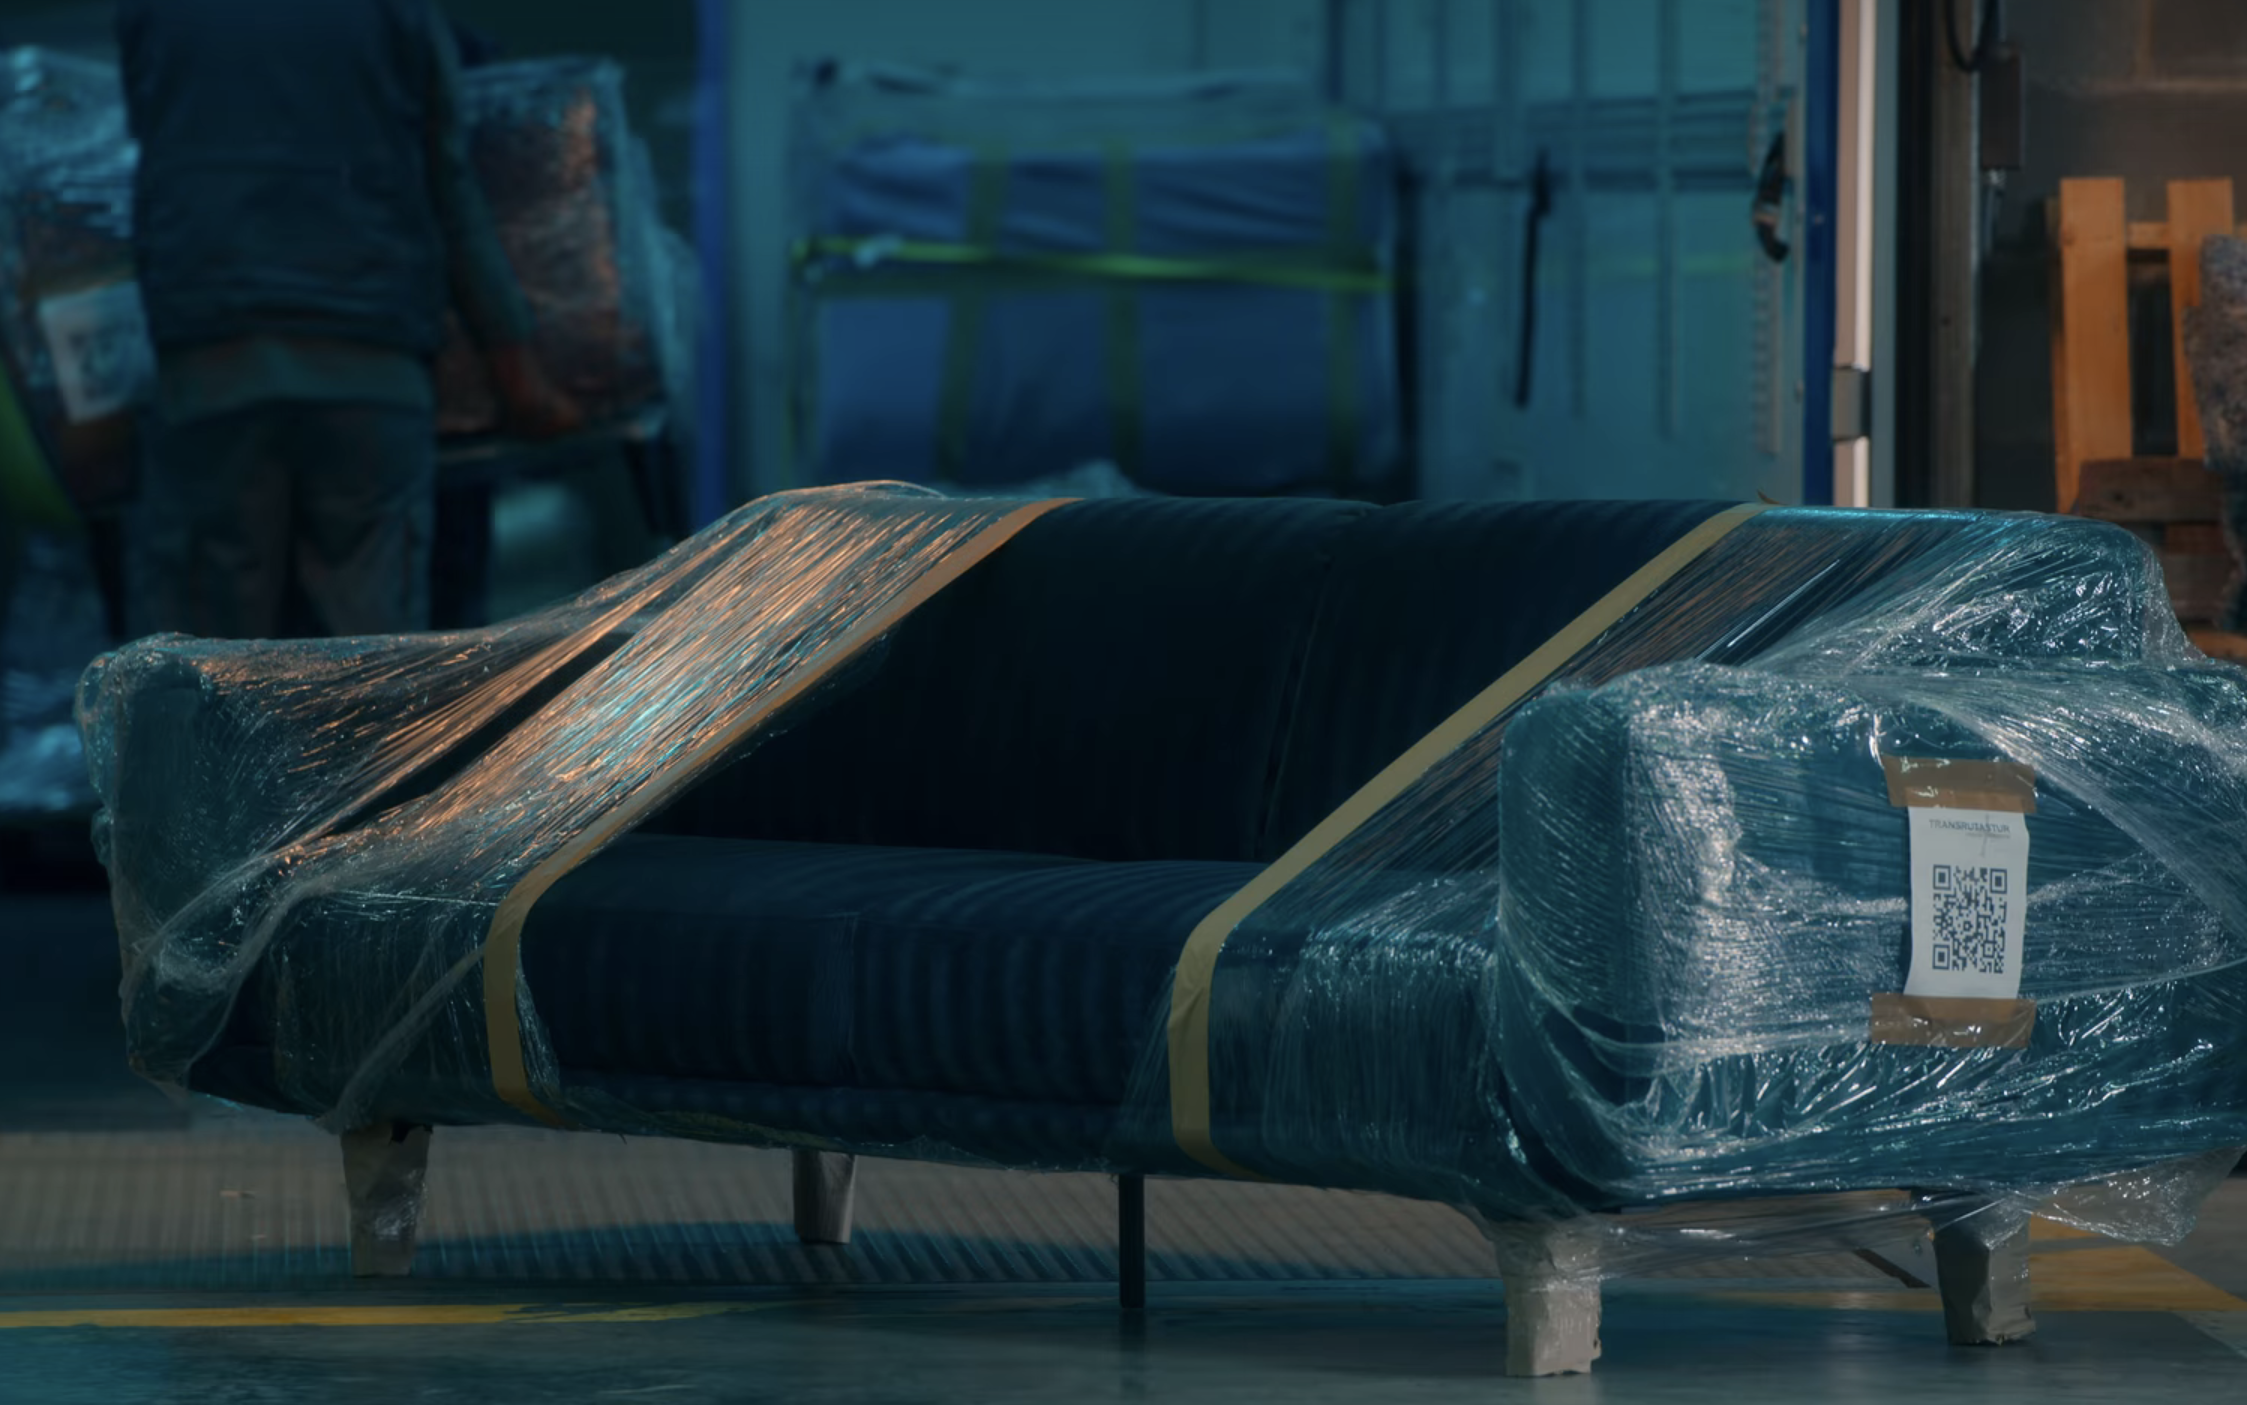 Blue couch partially wrapped in plastic sitting in a warehouse.